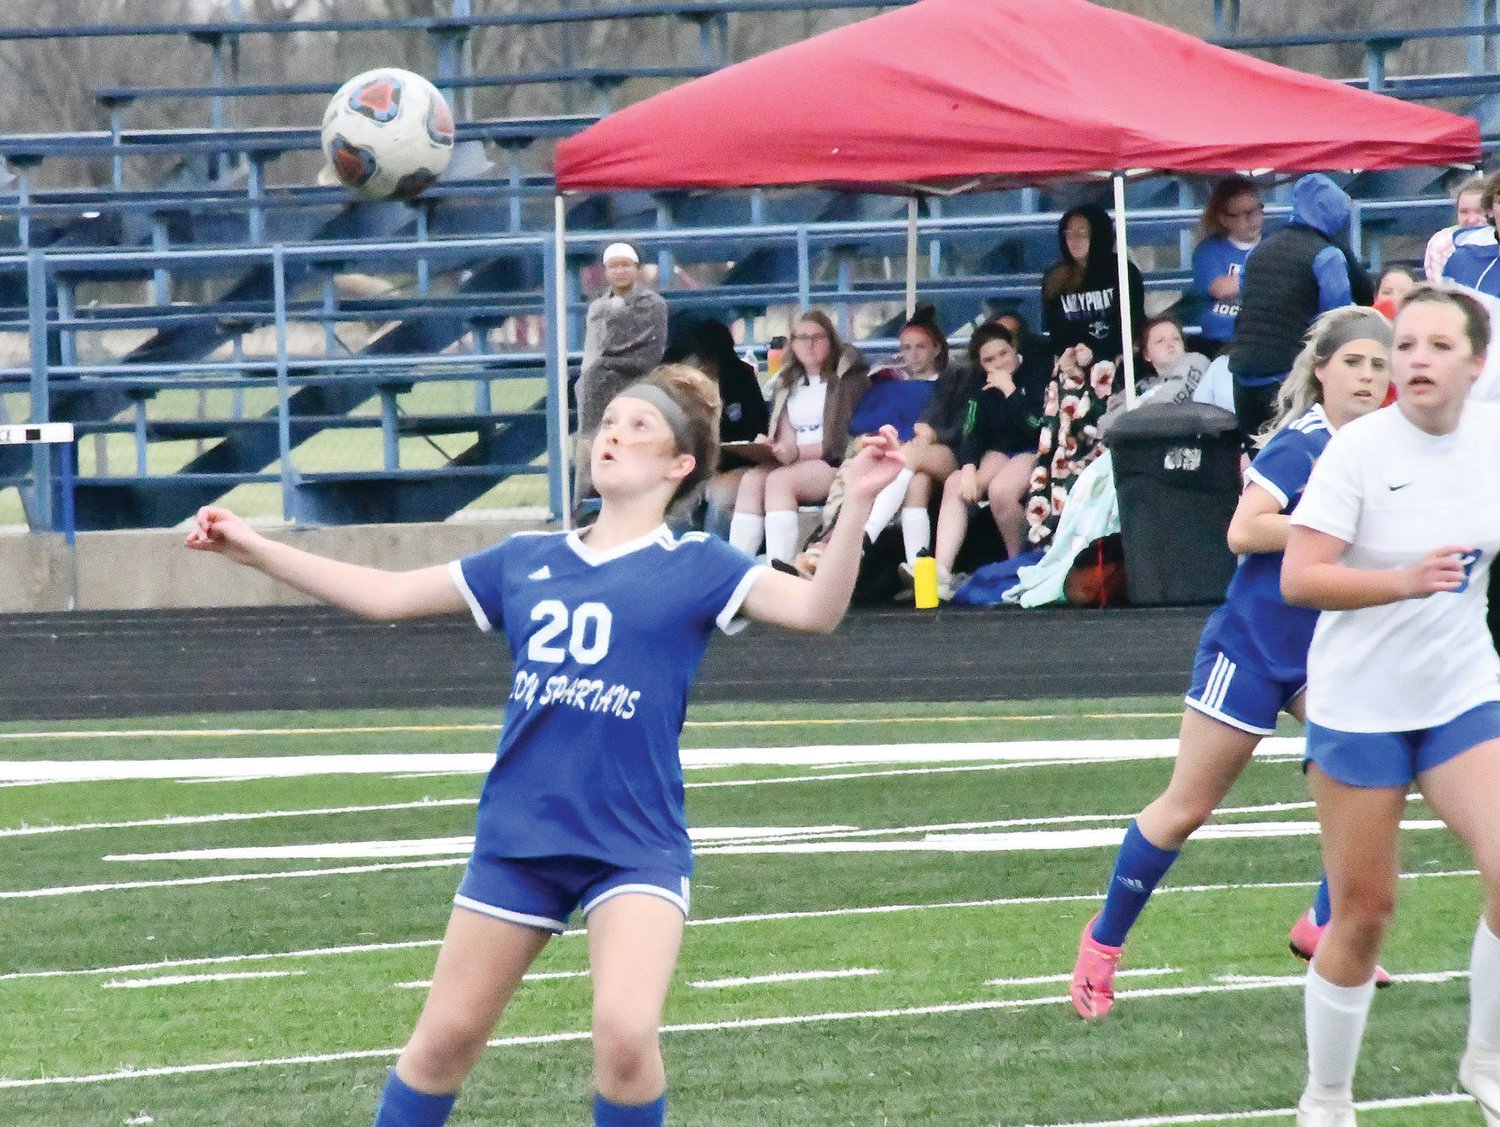 Moberly’s Zaylee Heaton (20) attempts to trap the ball during last Thursday’s match with Boonville. Heaton scored once and had an assist in the Spartans’ 5-0 victory.